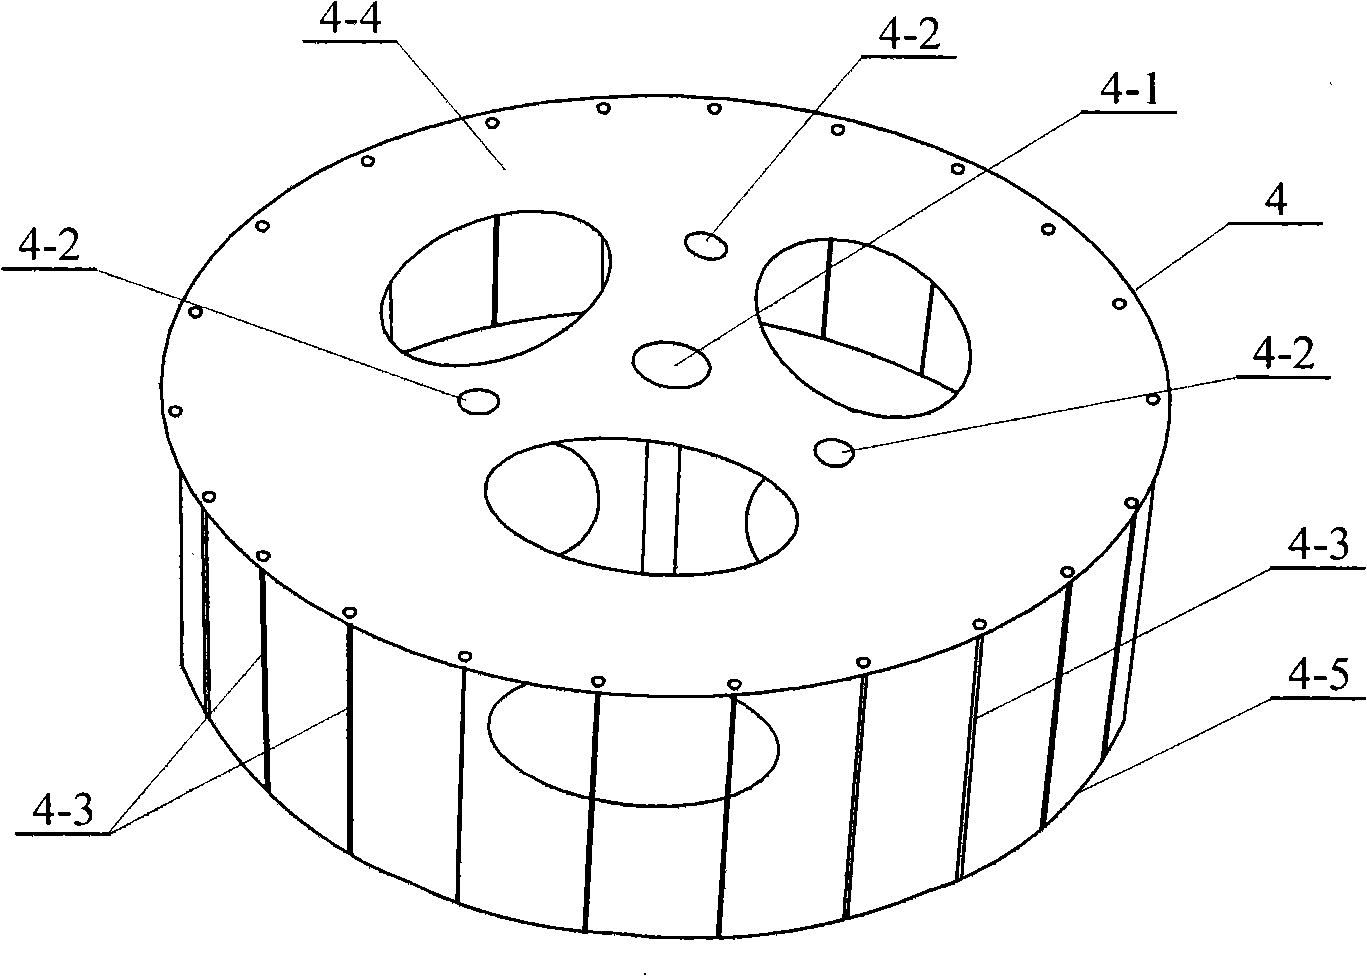 Rigidizable inflating-expansion radial direction rib support type offset-feed paraboloidal antenna